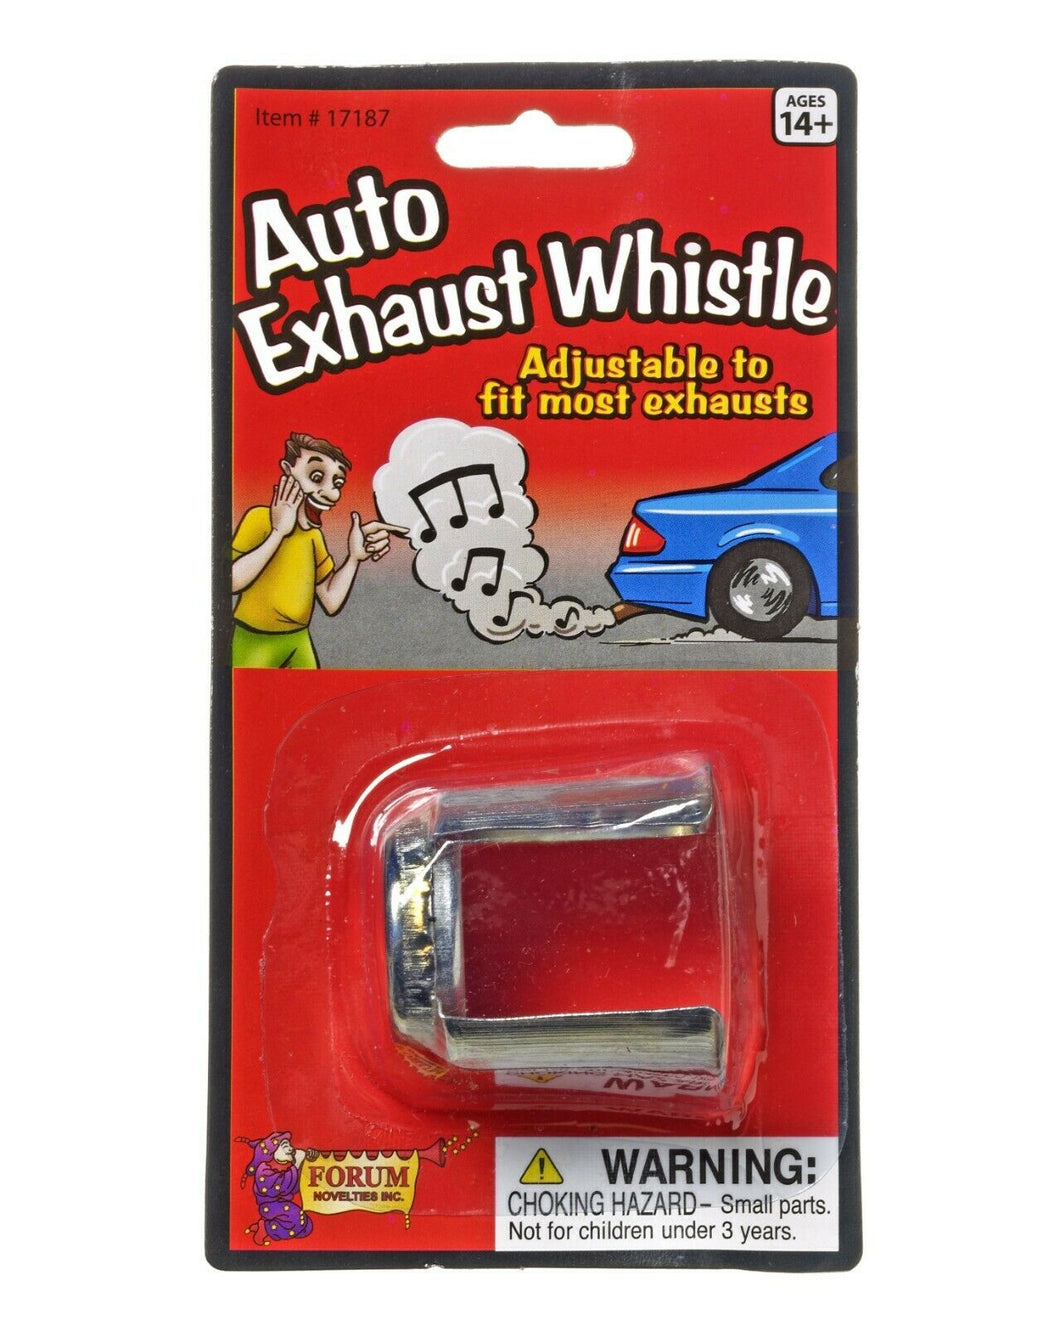 Auto Exhaust Whistle - Place This In Your Victim's Exhaust Pipe - Hilarious!